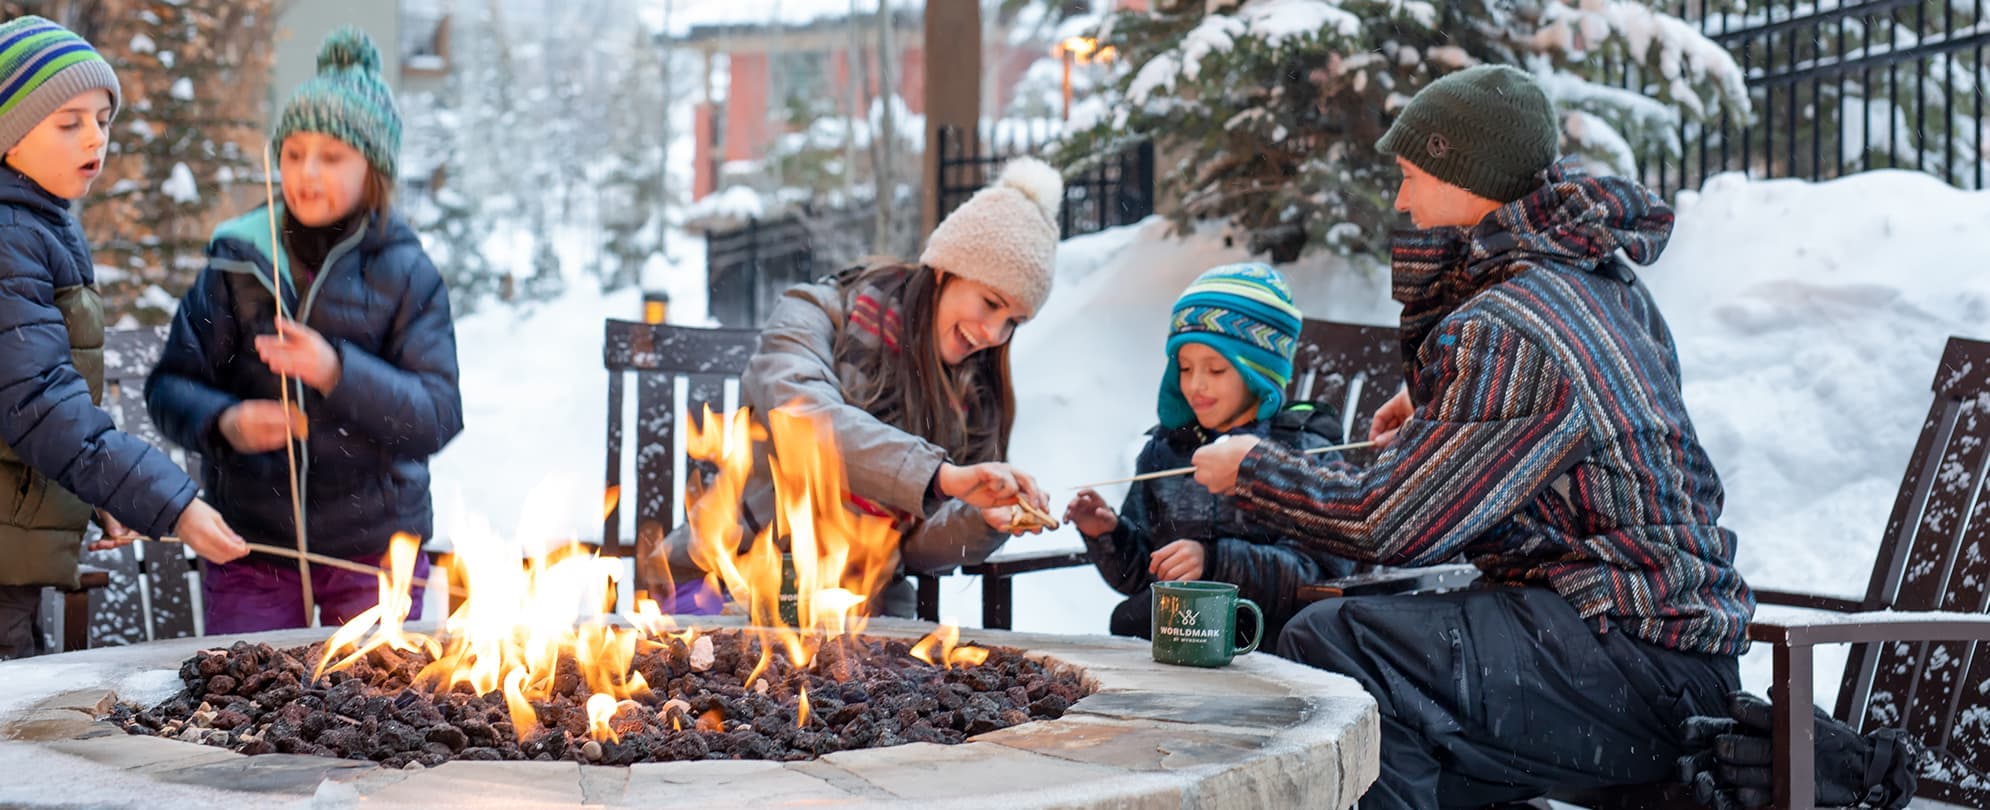 Family of five bundled up from the snow toasting marshmallows at an outdoor fire pit